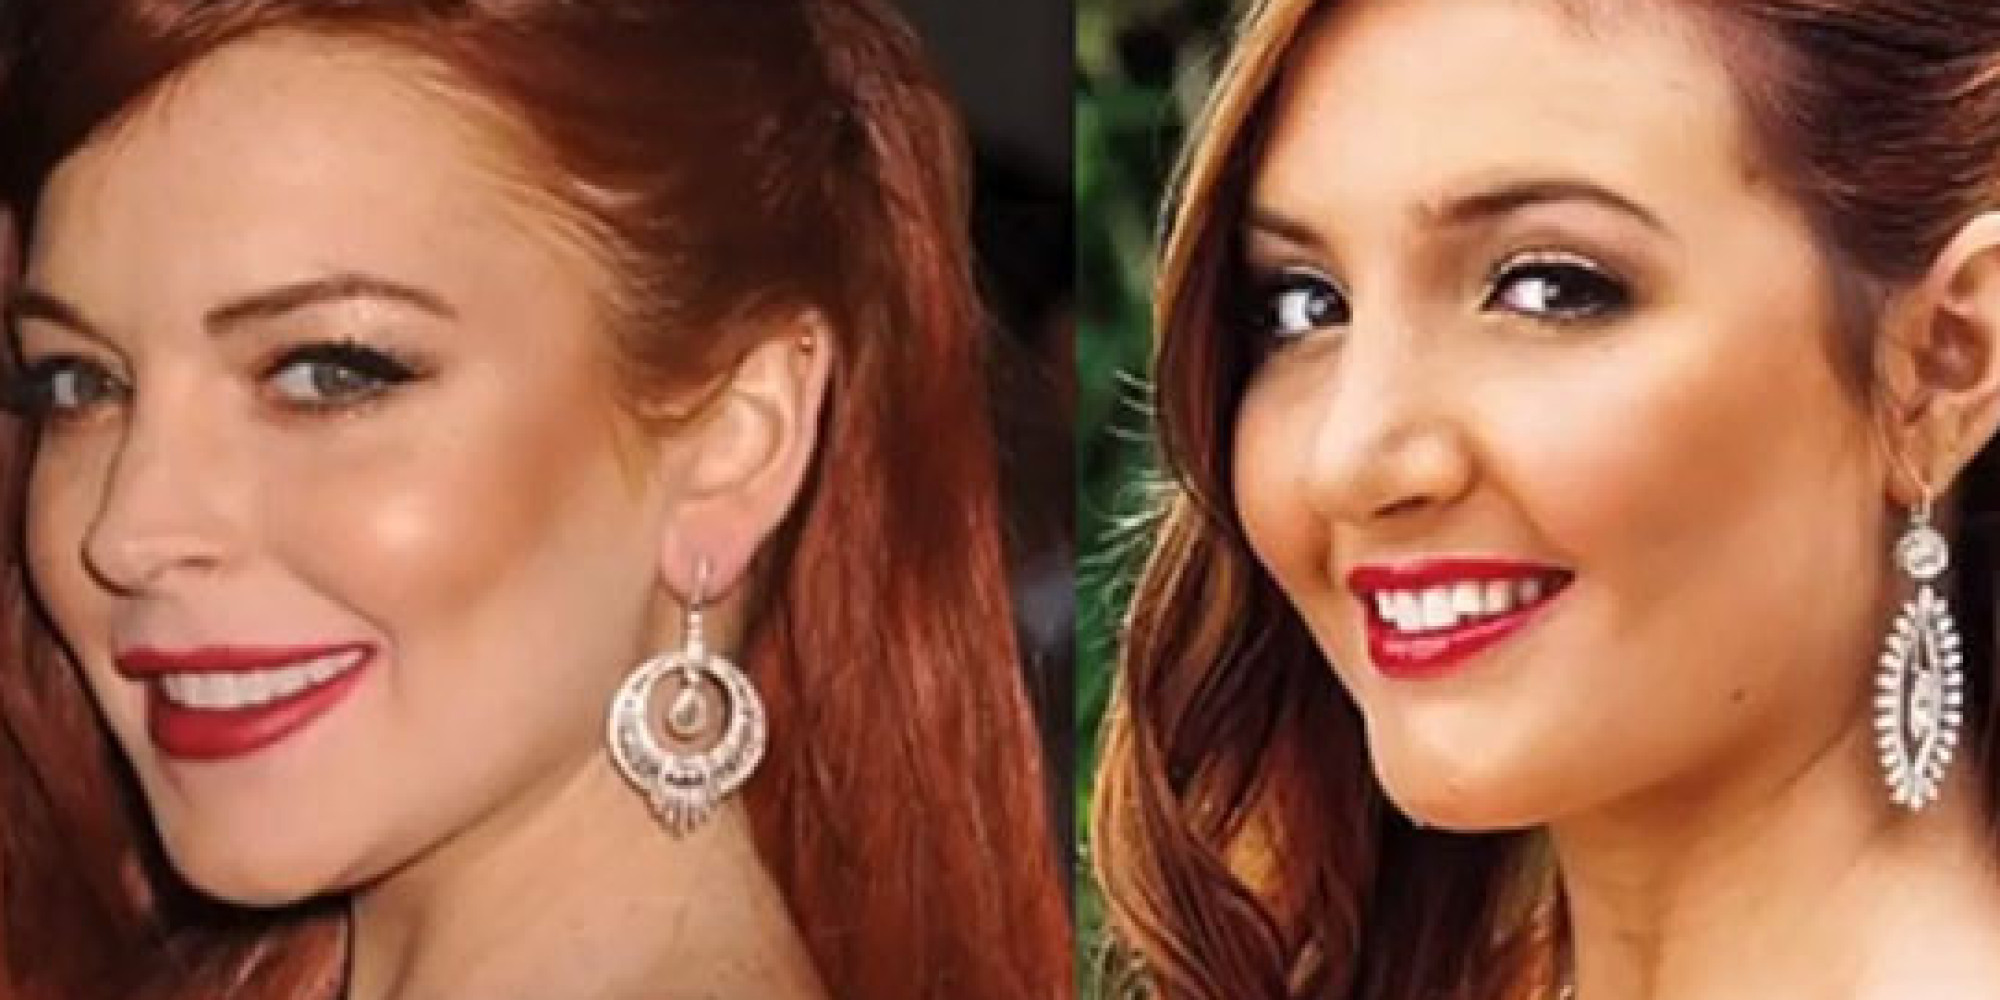 Celebrity Plastic Surgery 8 People Who Have Had Extreme Operations To Look Like Their Favorite